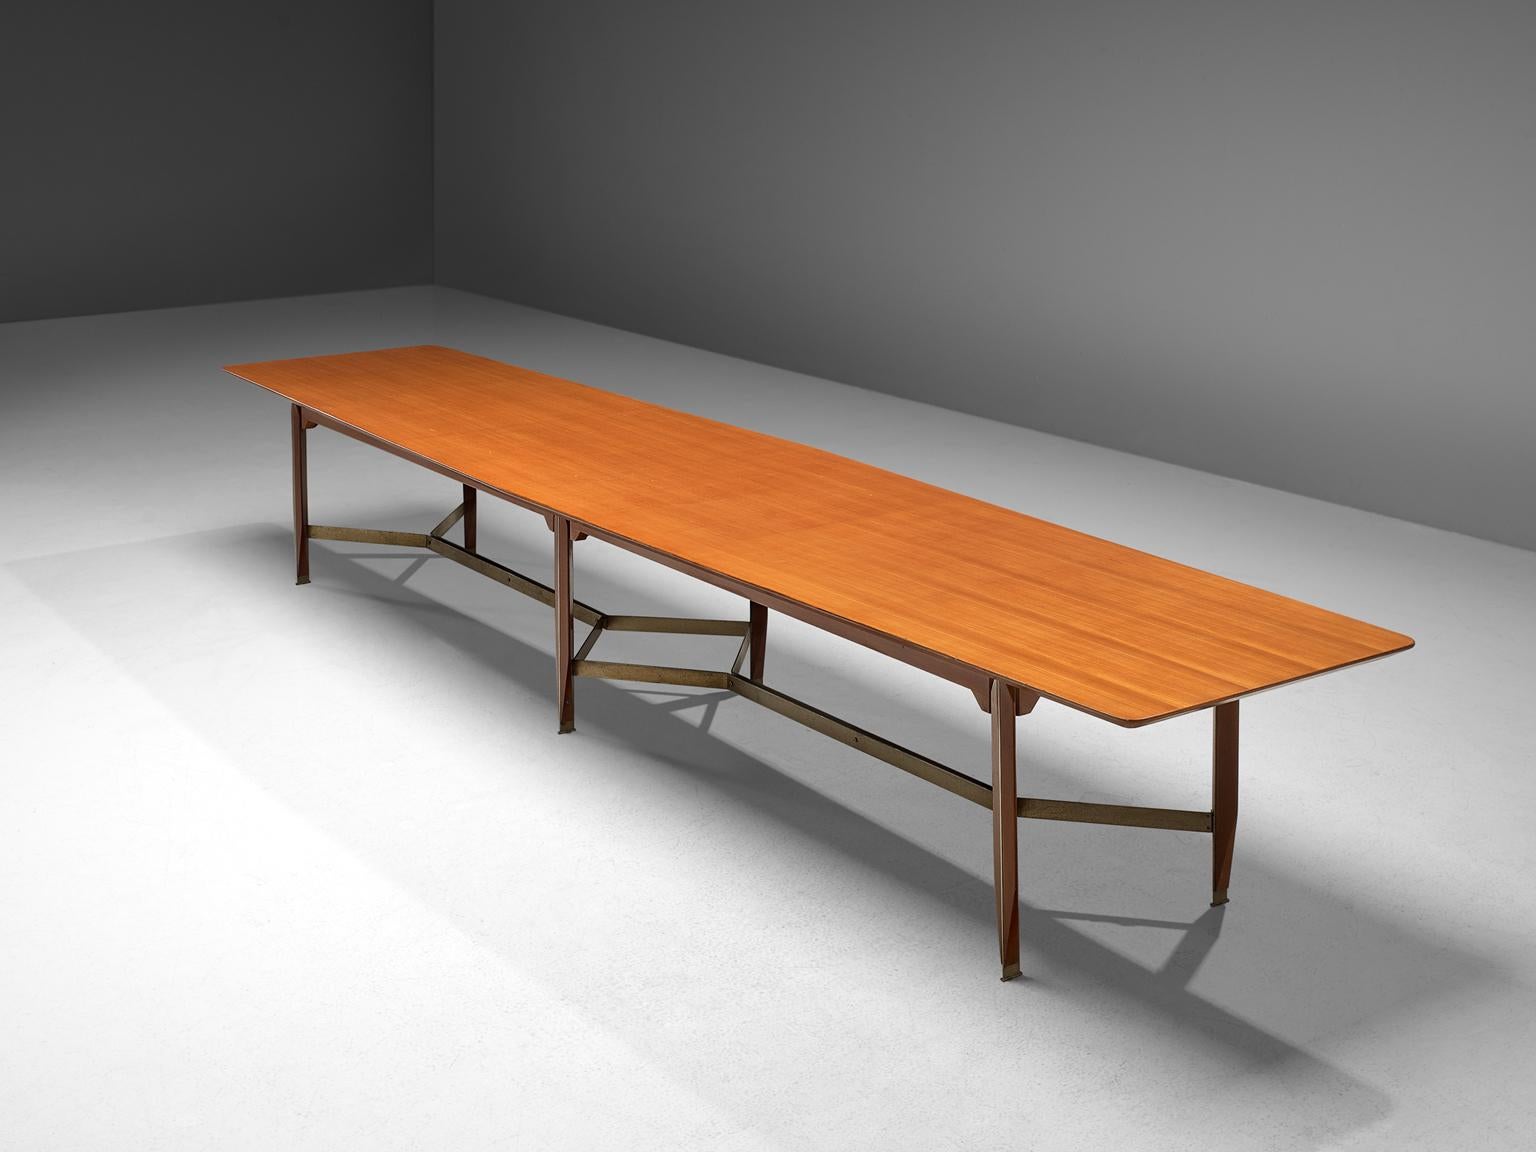 Giulio Moscatelli, conference table, teak, metal and brass, Italy, 1970s.

Very lage conference table designed by Giulio Moscatelli. The tabletop is slightly boat shaped and features a notable frame. The six legs are made of teak and a metal strip,